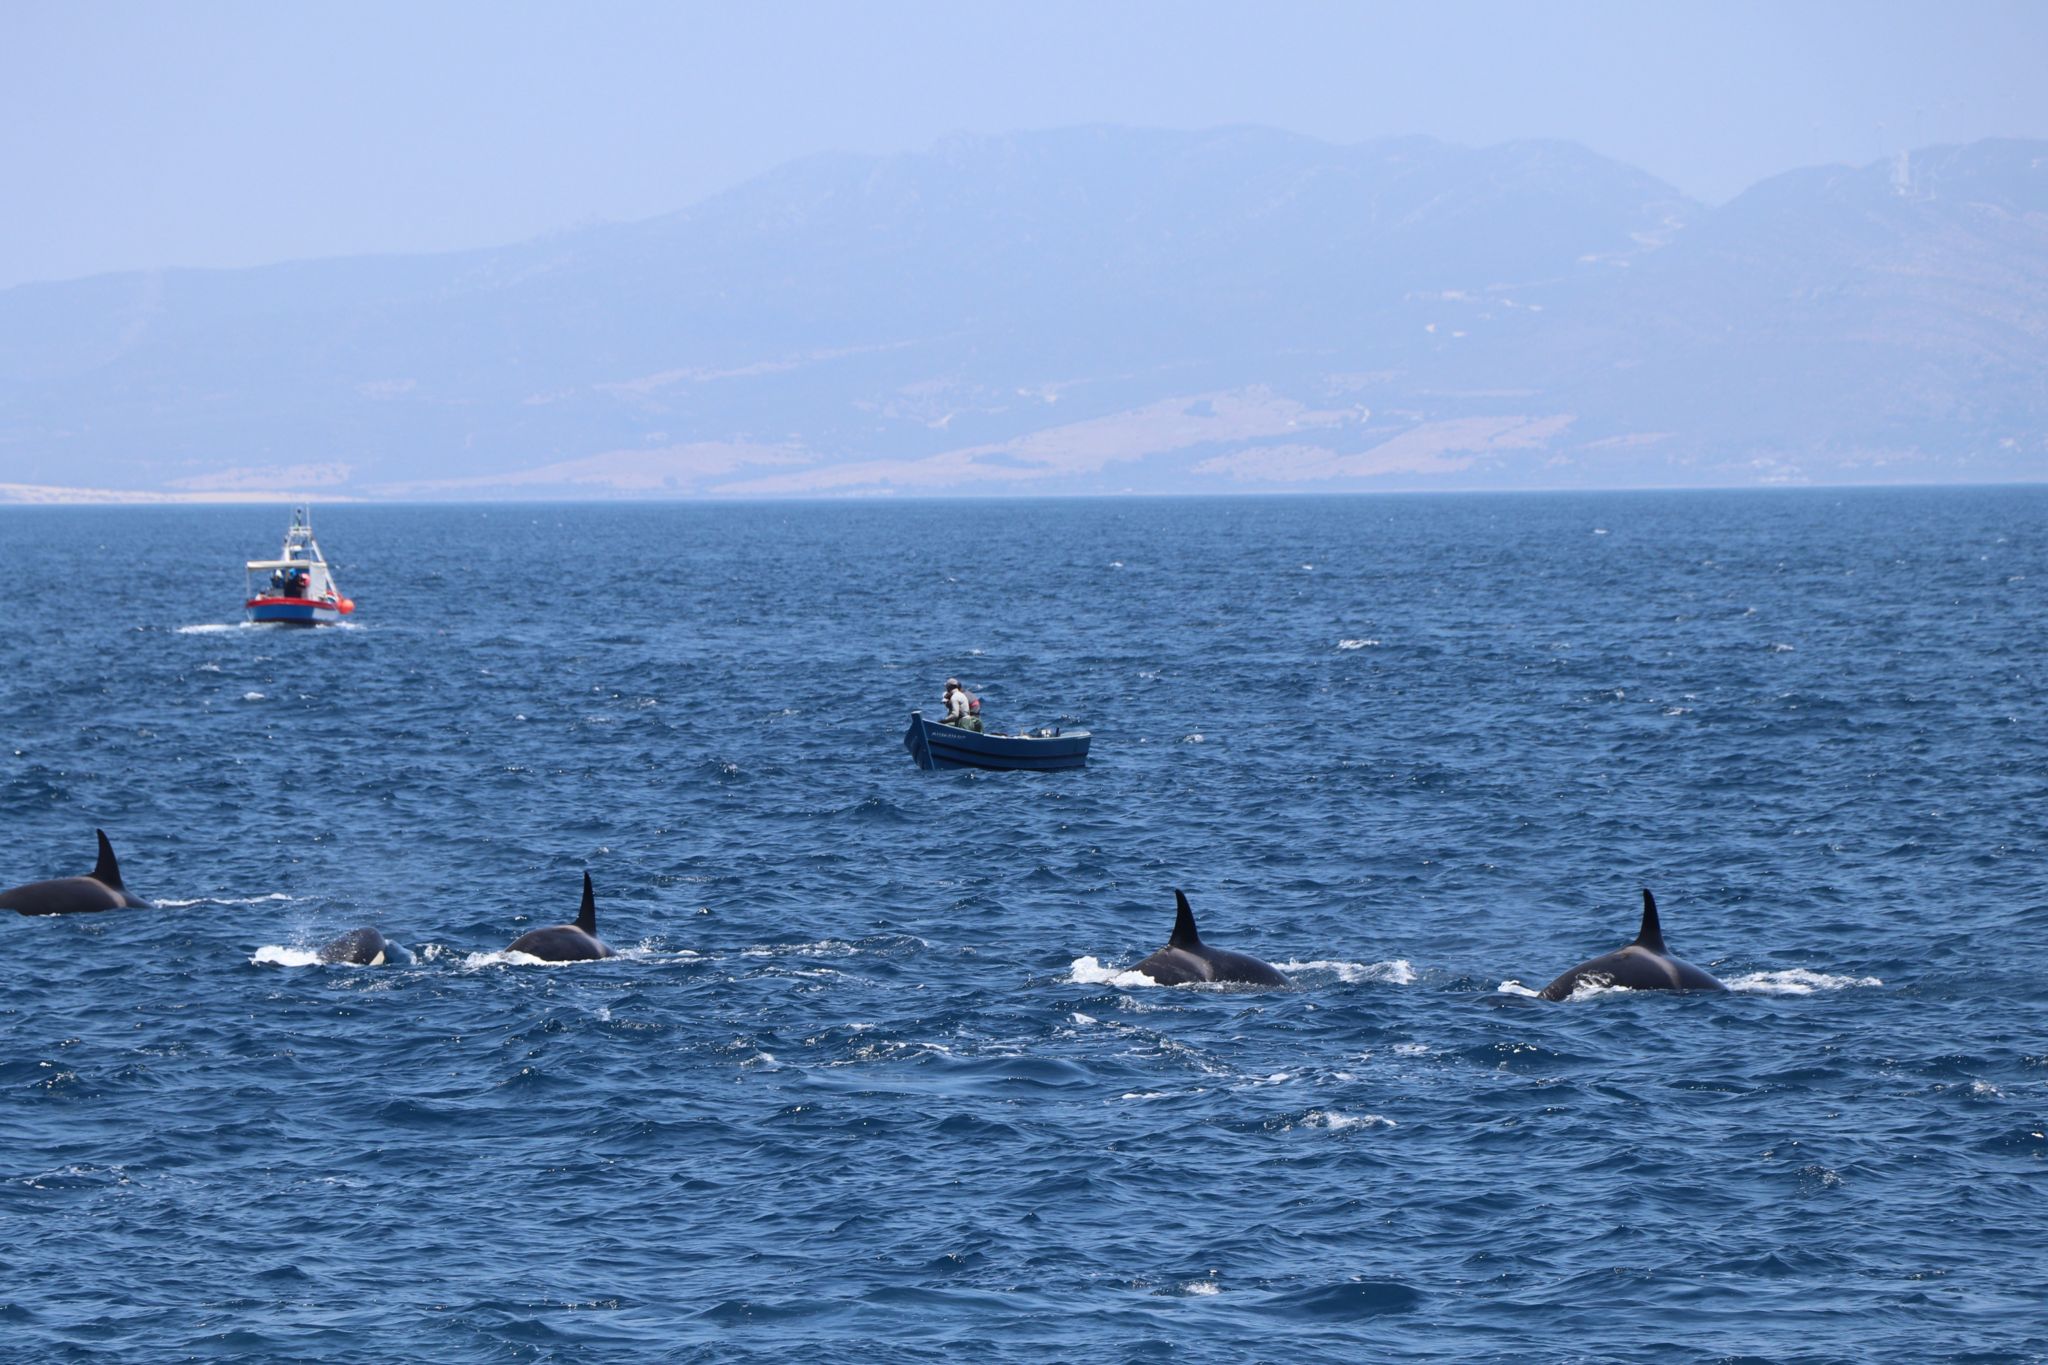 Iberian orcas and boats in the Strait of Gibraltar